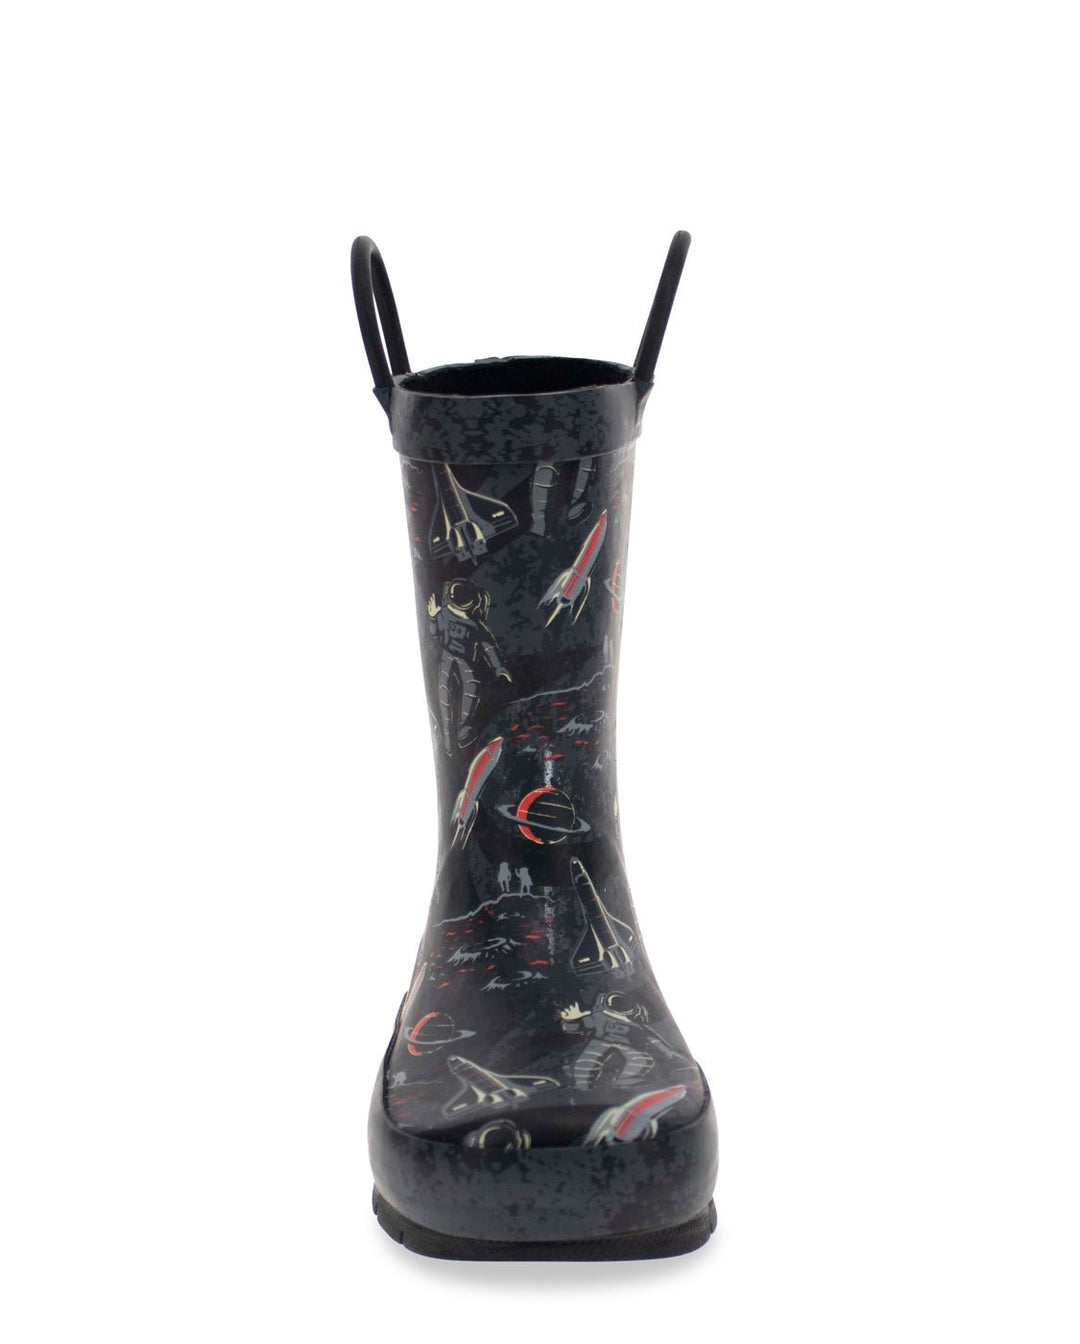 Kids Space Tour Rain Boot - Charcoal - Western Chief